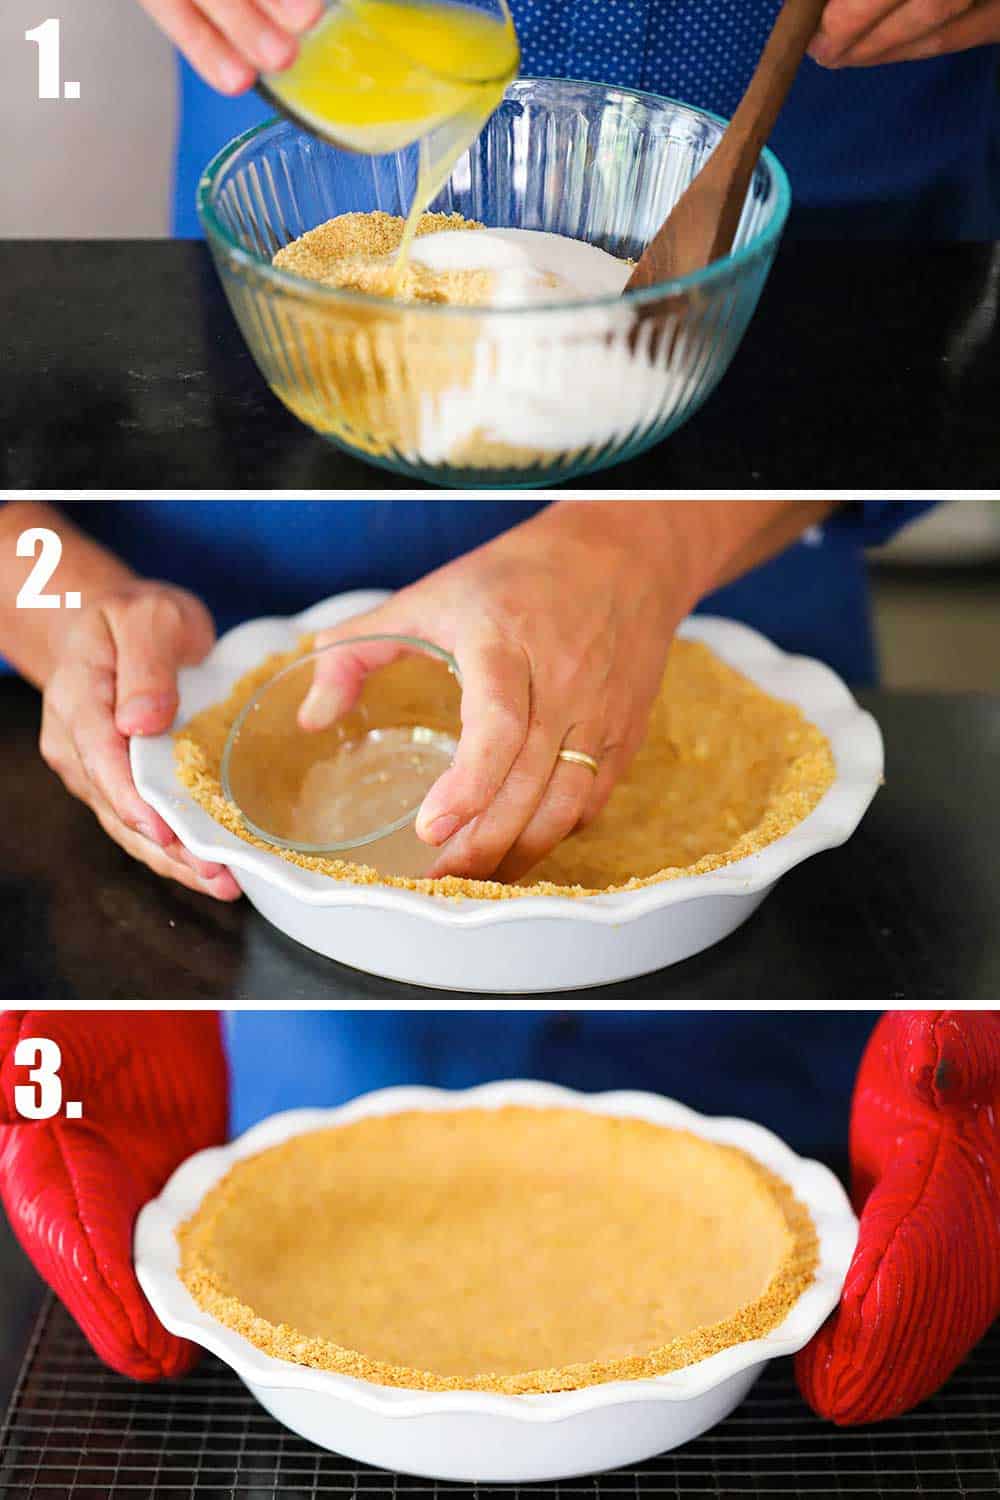 3 stacked images: Top is melted butter pouring into a bowl of cookie crumbs and sugar, the next is a bowl pressing the crust into a dish, and the bottom the baked pie crust. 